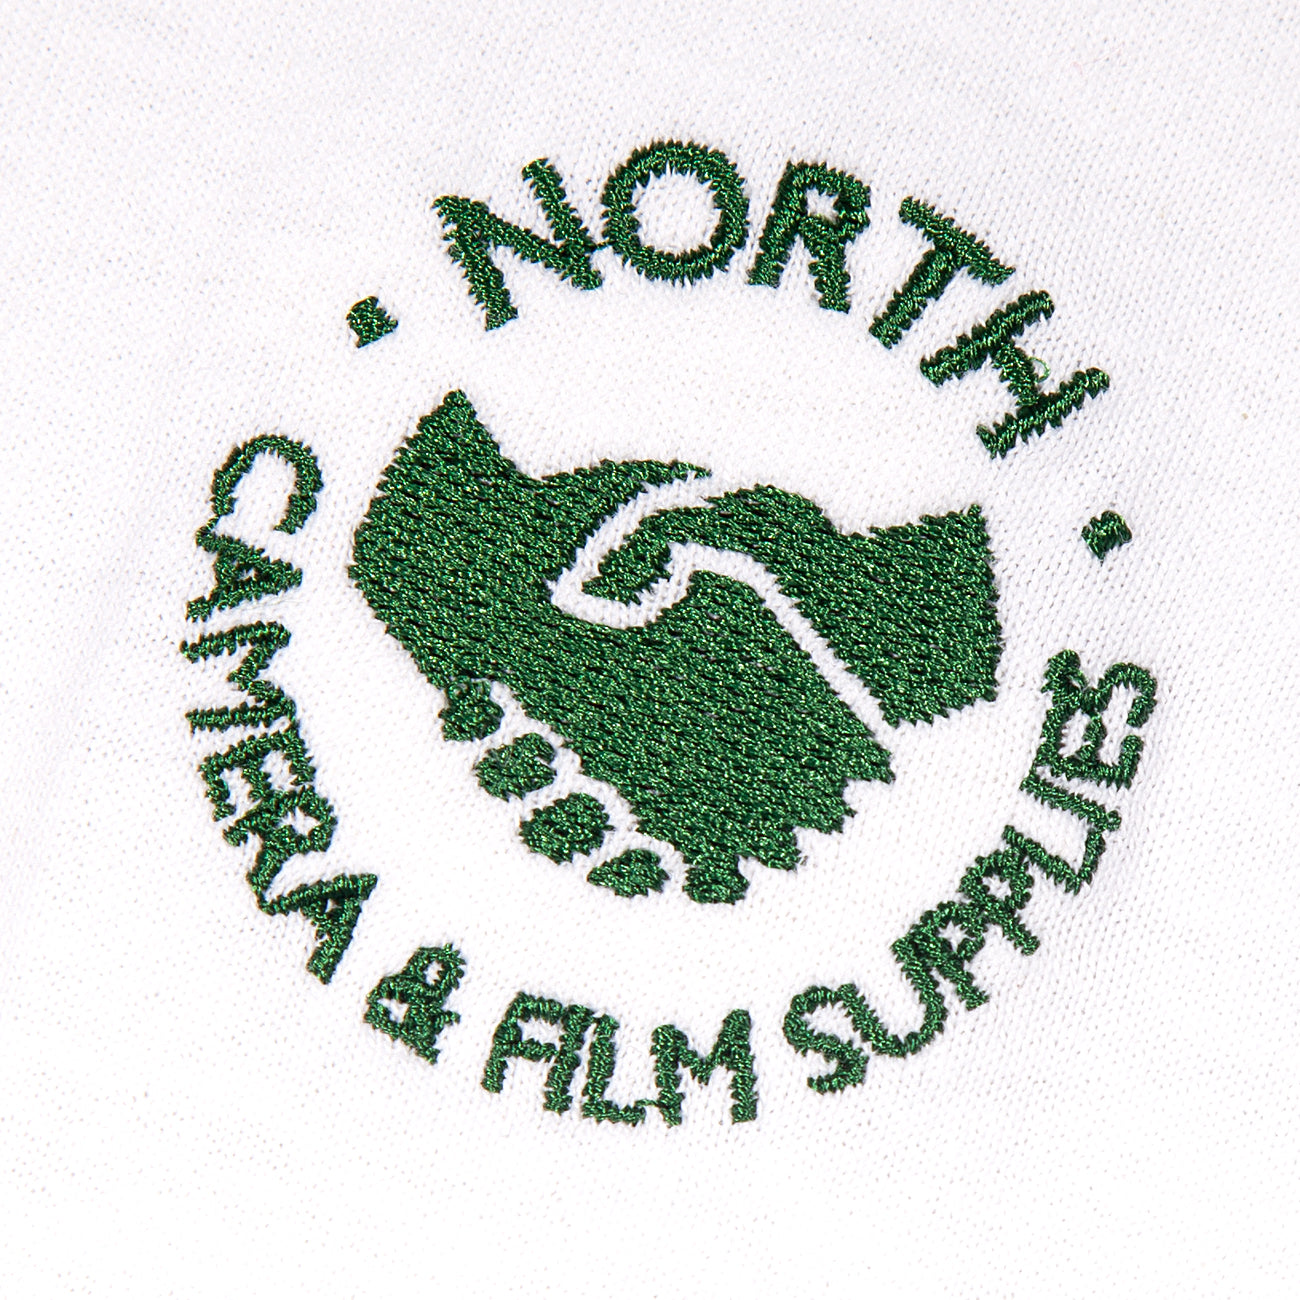 North Supplies Logo Embroidery T-Shirt - White/Green